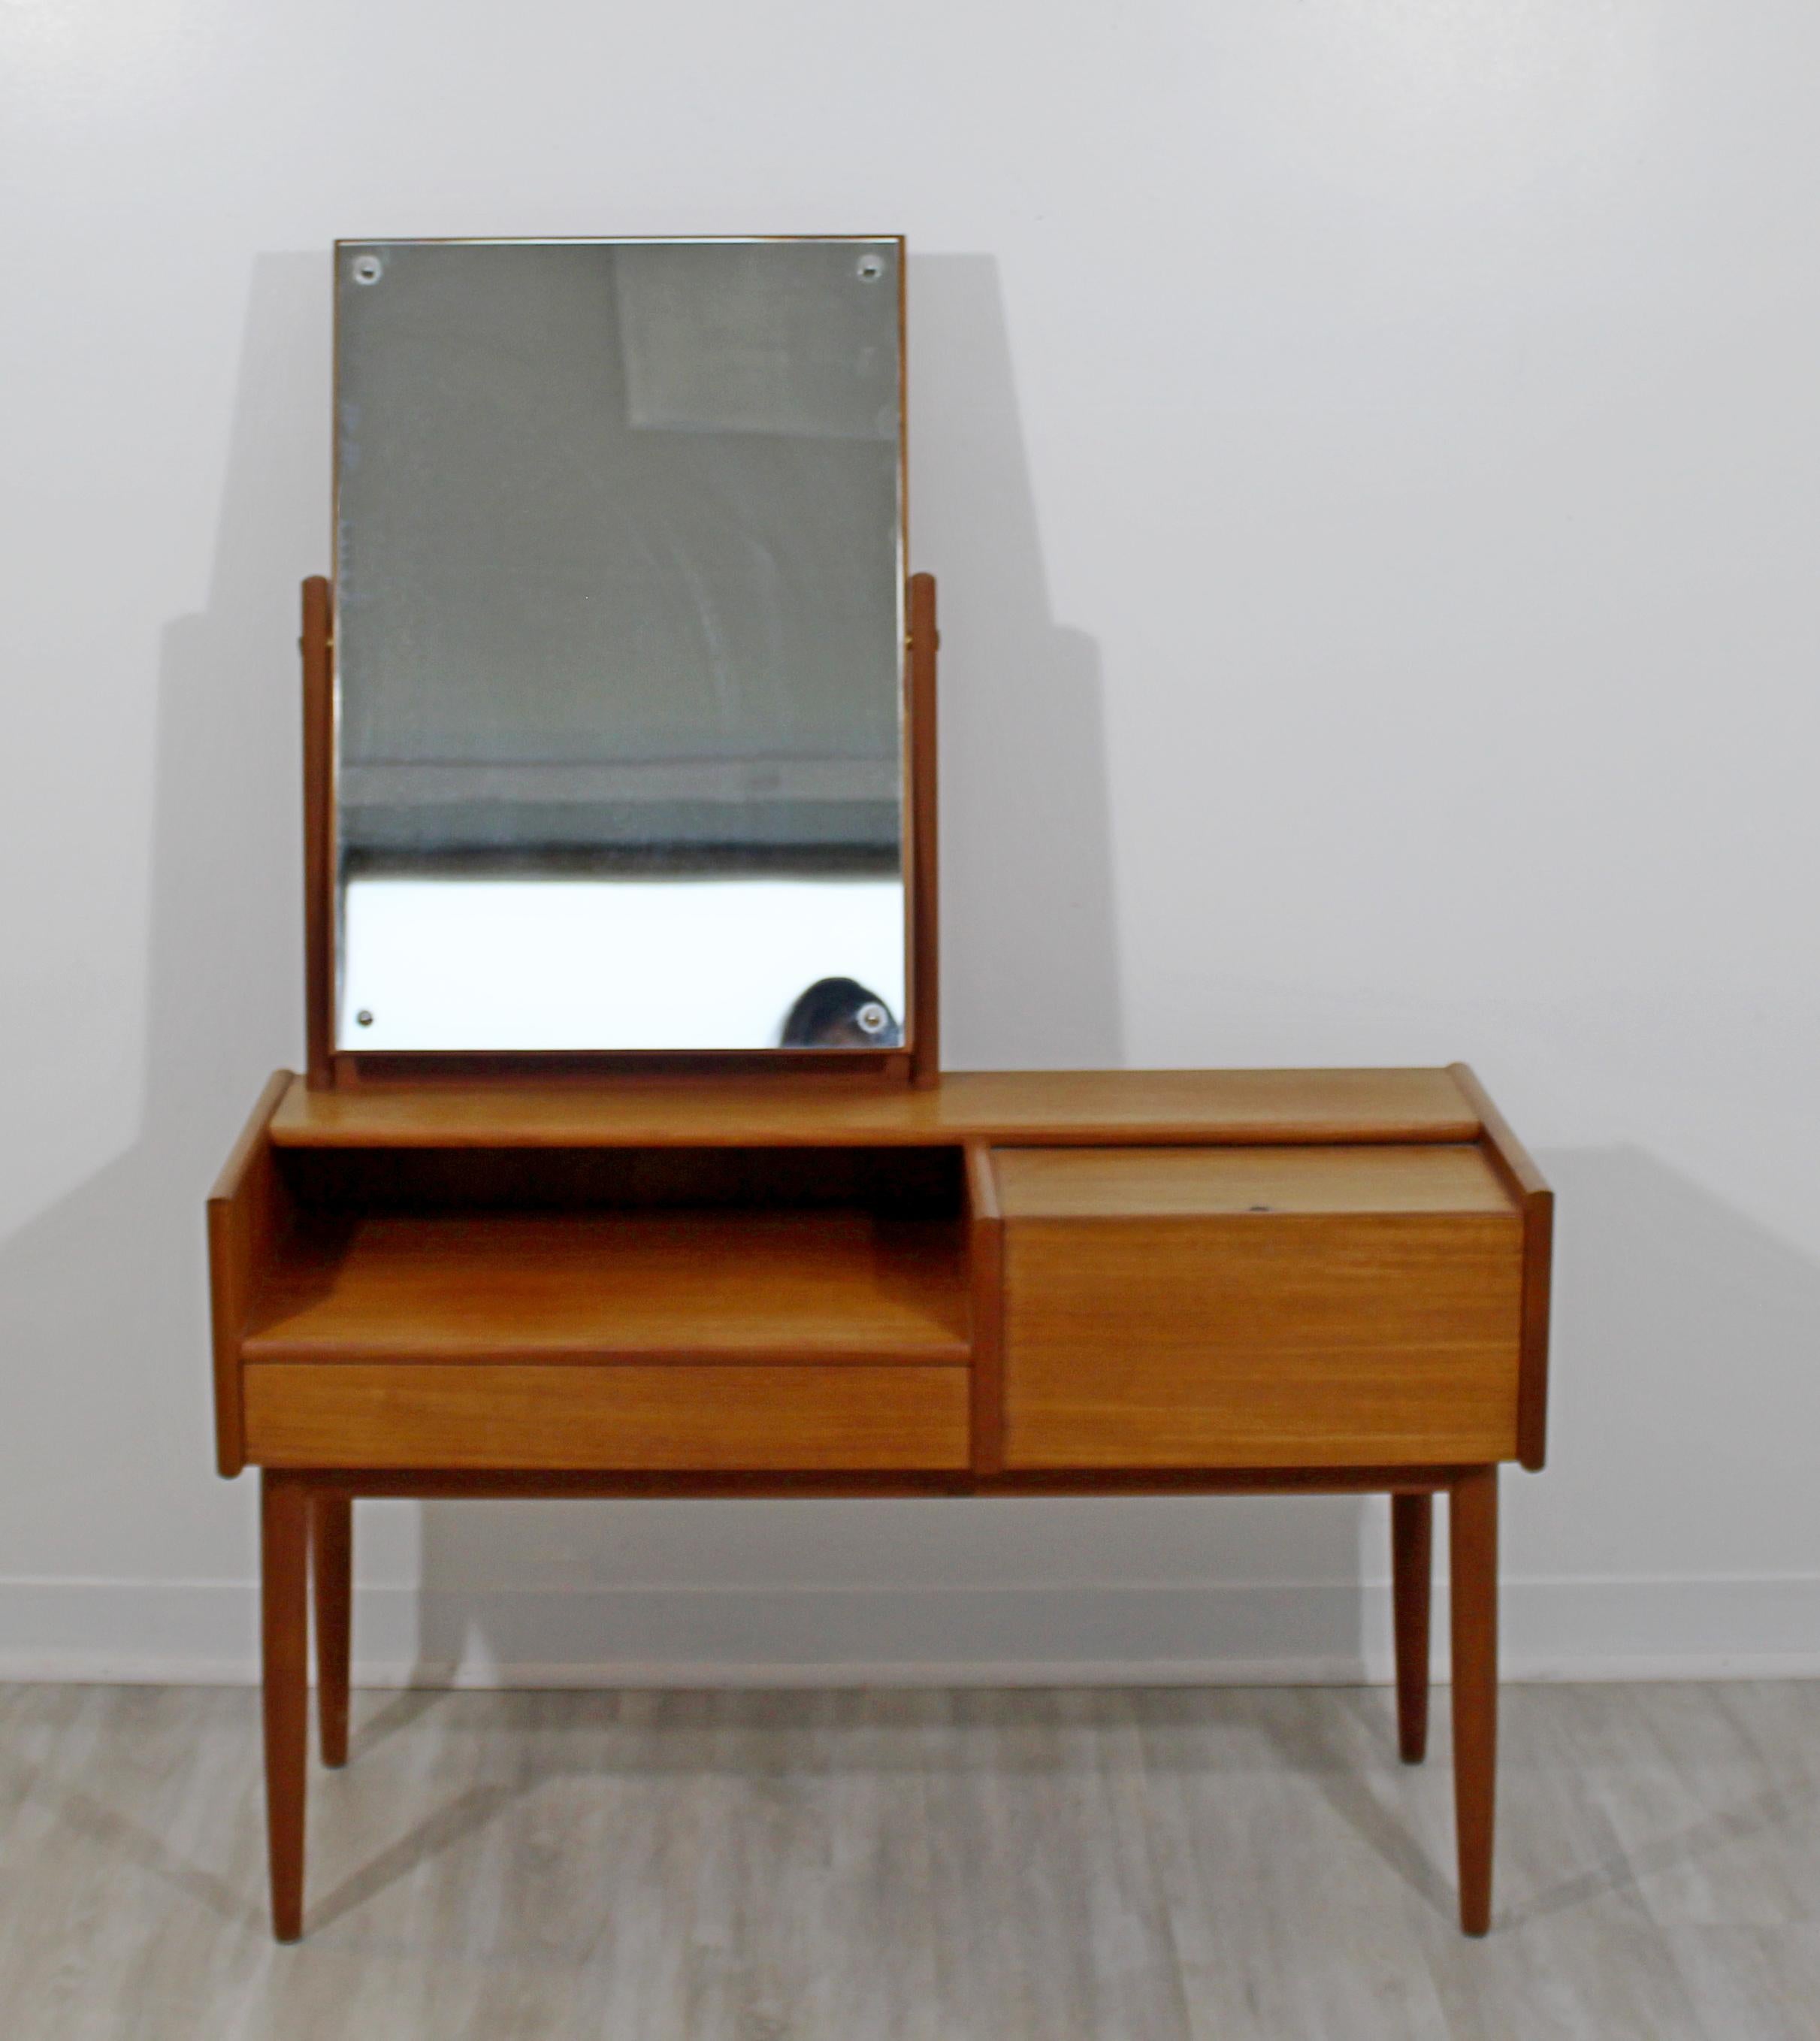 For your consideration is a magnificent, teak dressing table vanity, with an attachable and adjustable mirror, made in Denmark, in the style of Kurt Ostervig or Arne Vodder, circa the 1960s. In excellent vintage condition. The dimensions of the